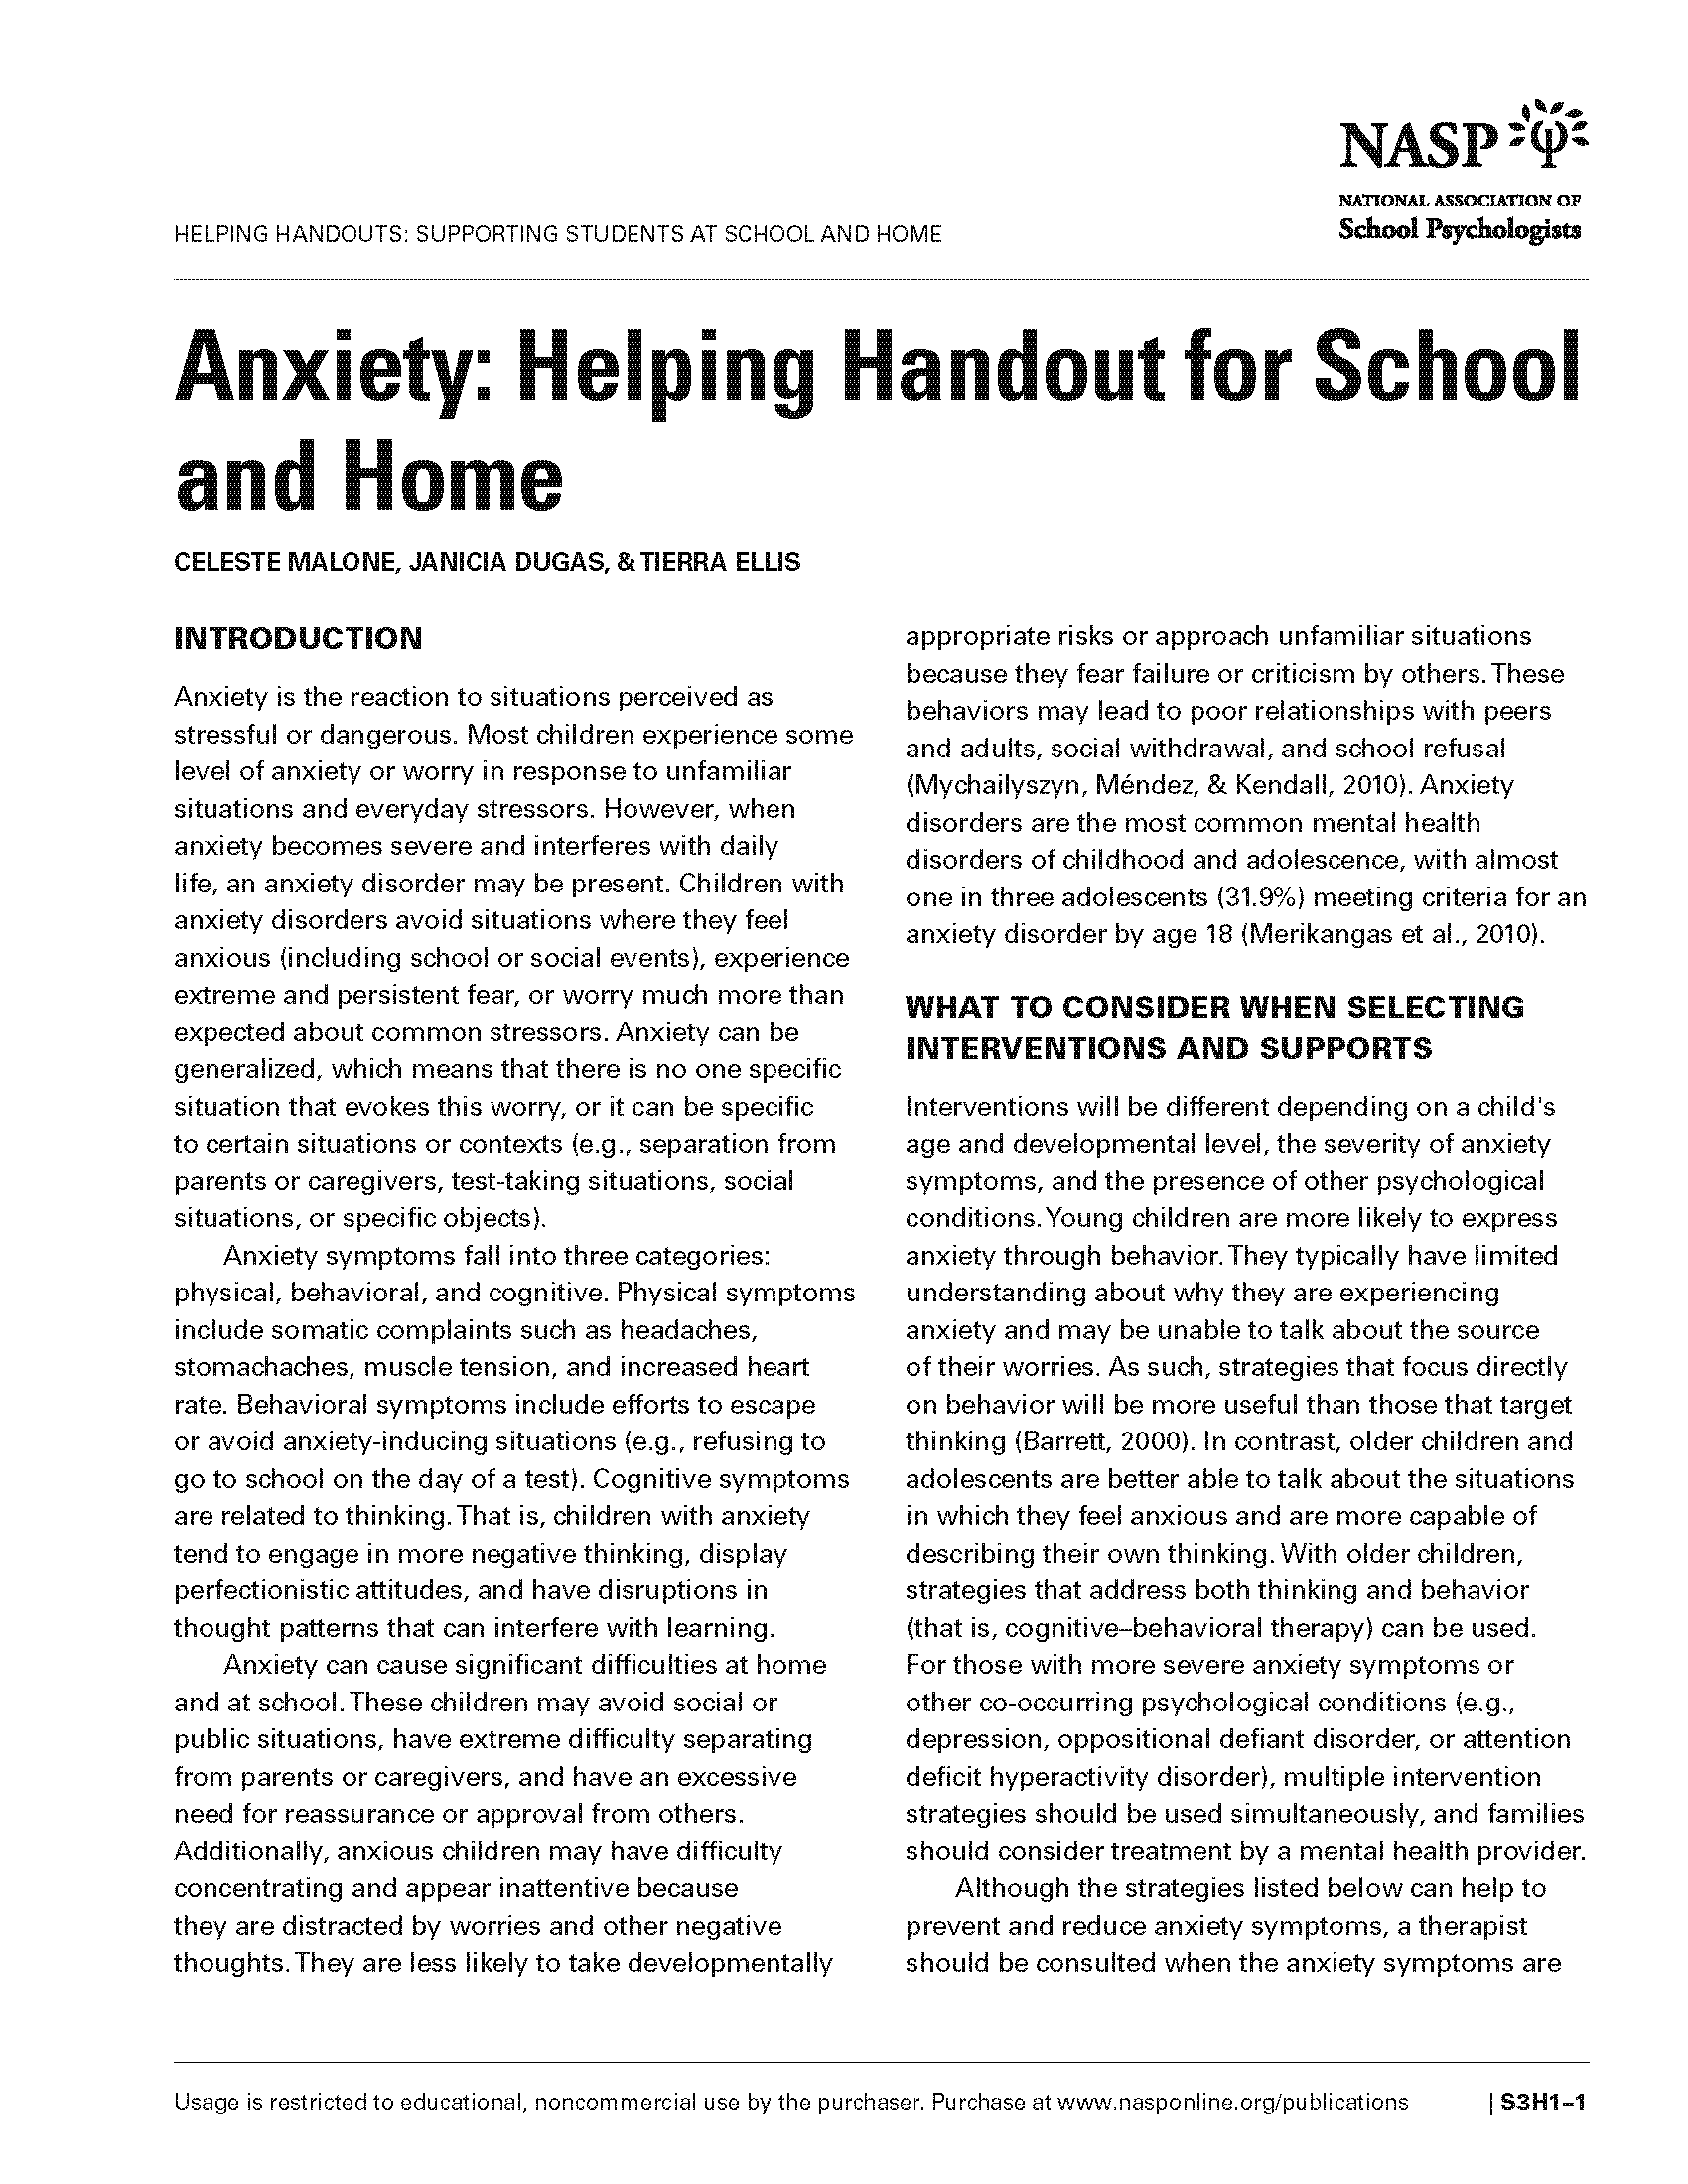 Anxiety: Helping Handout for School and Home